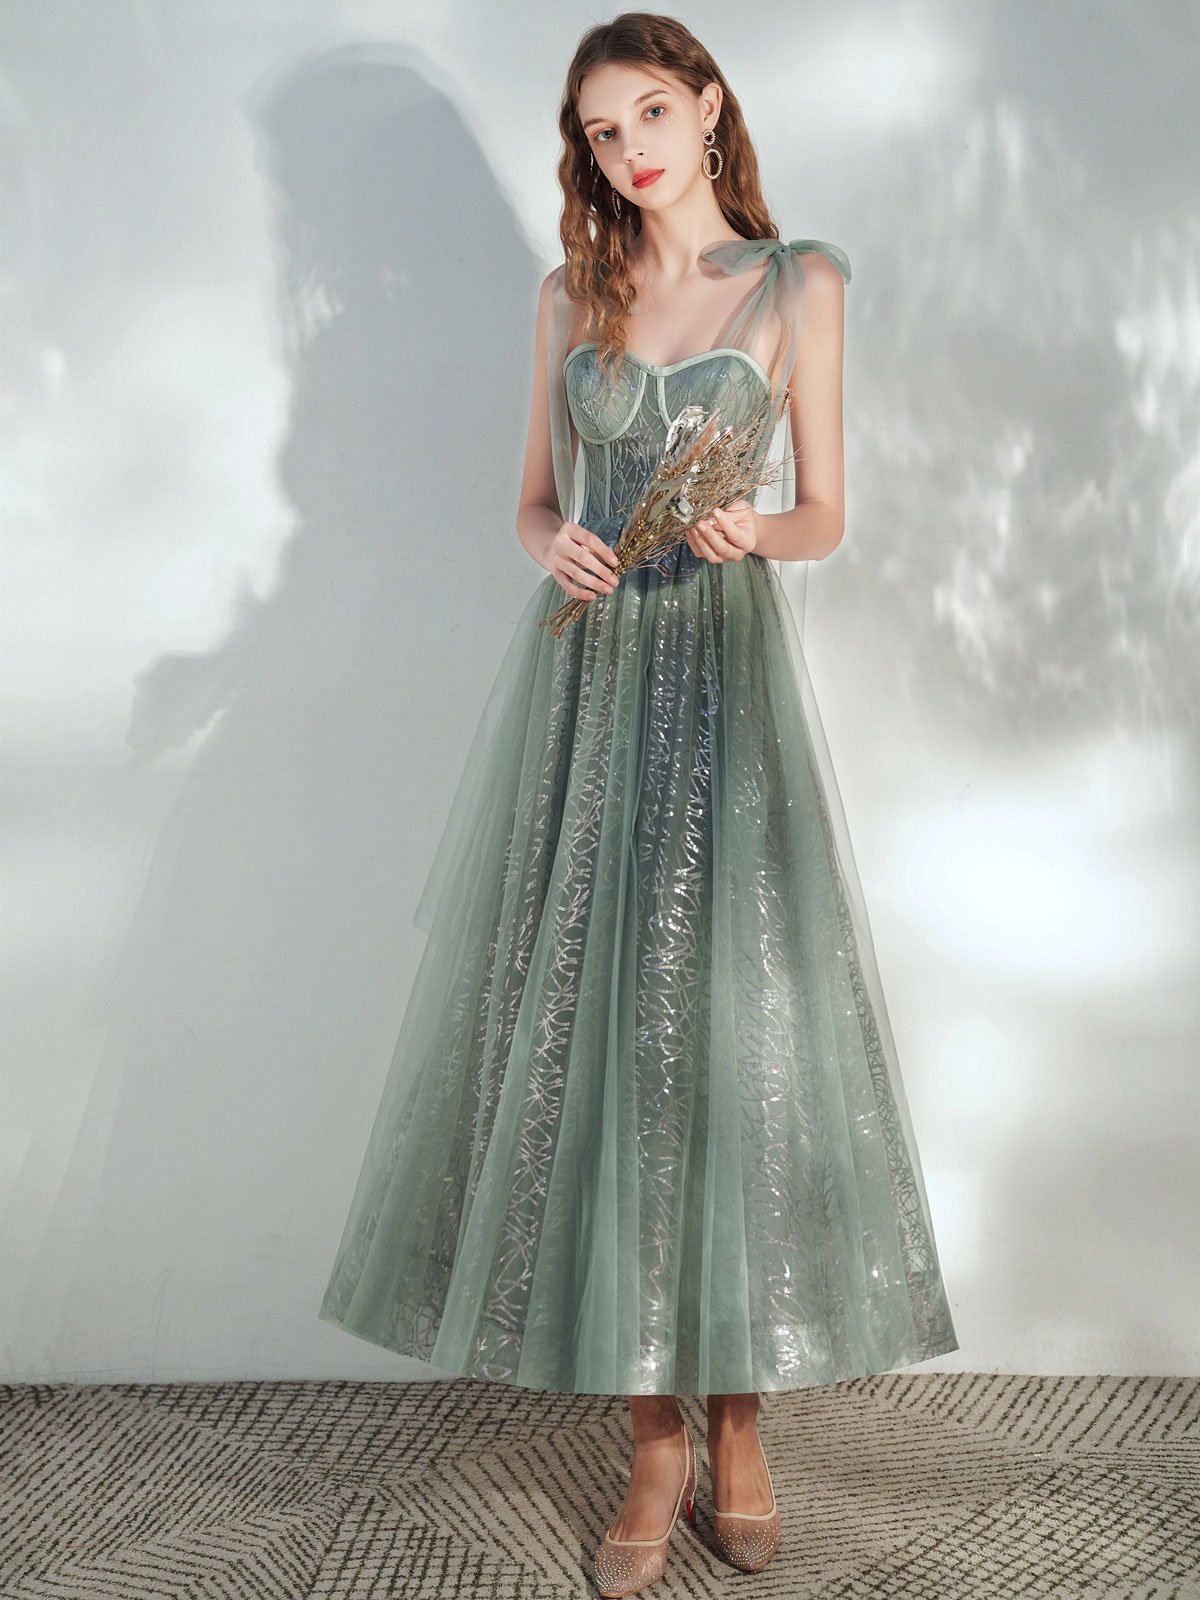 Green A -line Tulle Lace Tea Length Prom Dress Green Evening Dress